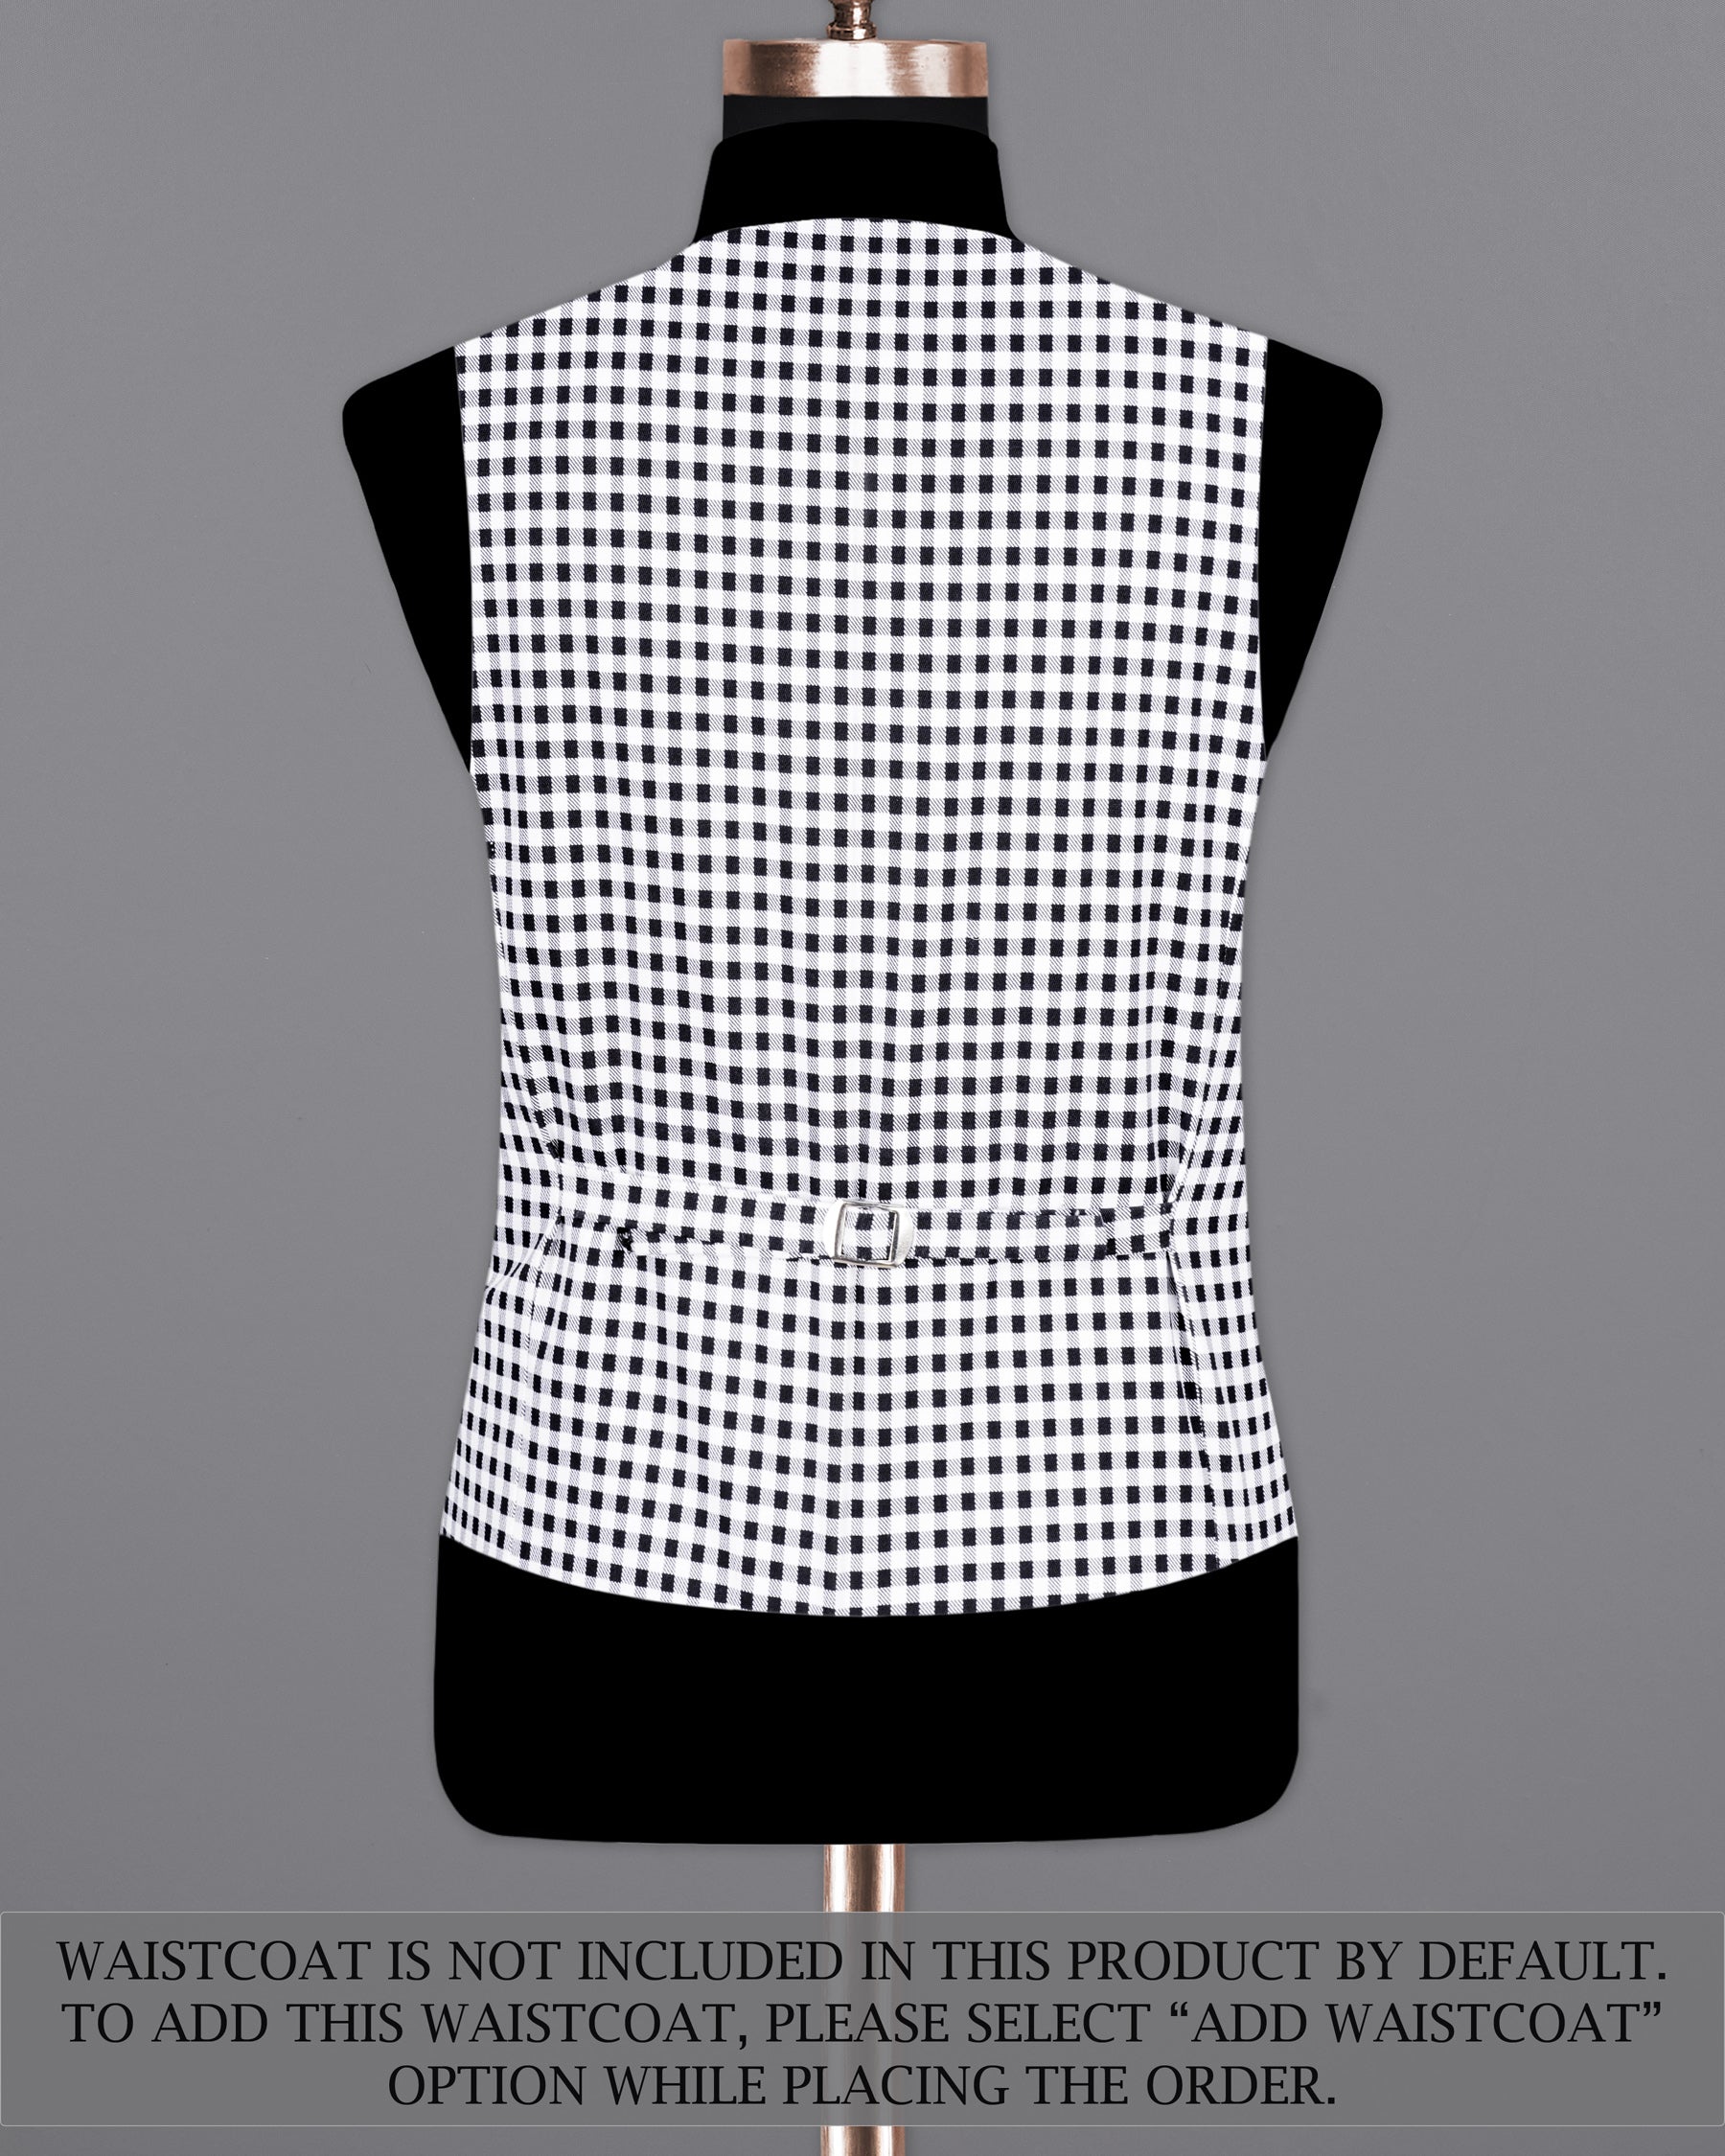 White and Black Mini Checkered Single Breasted Suit